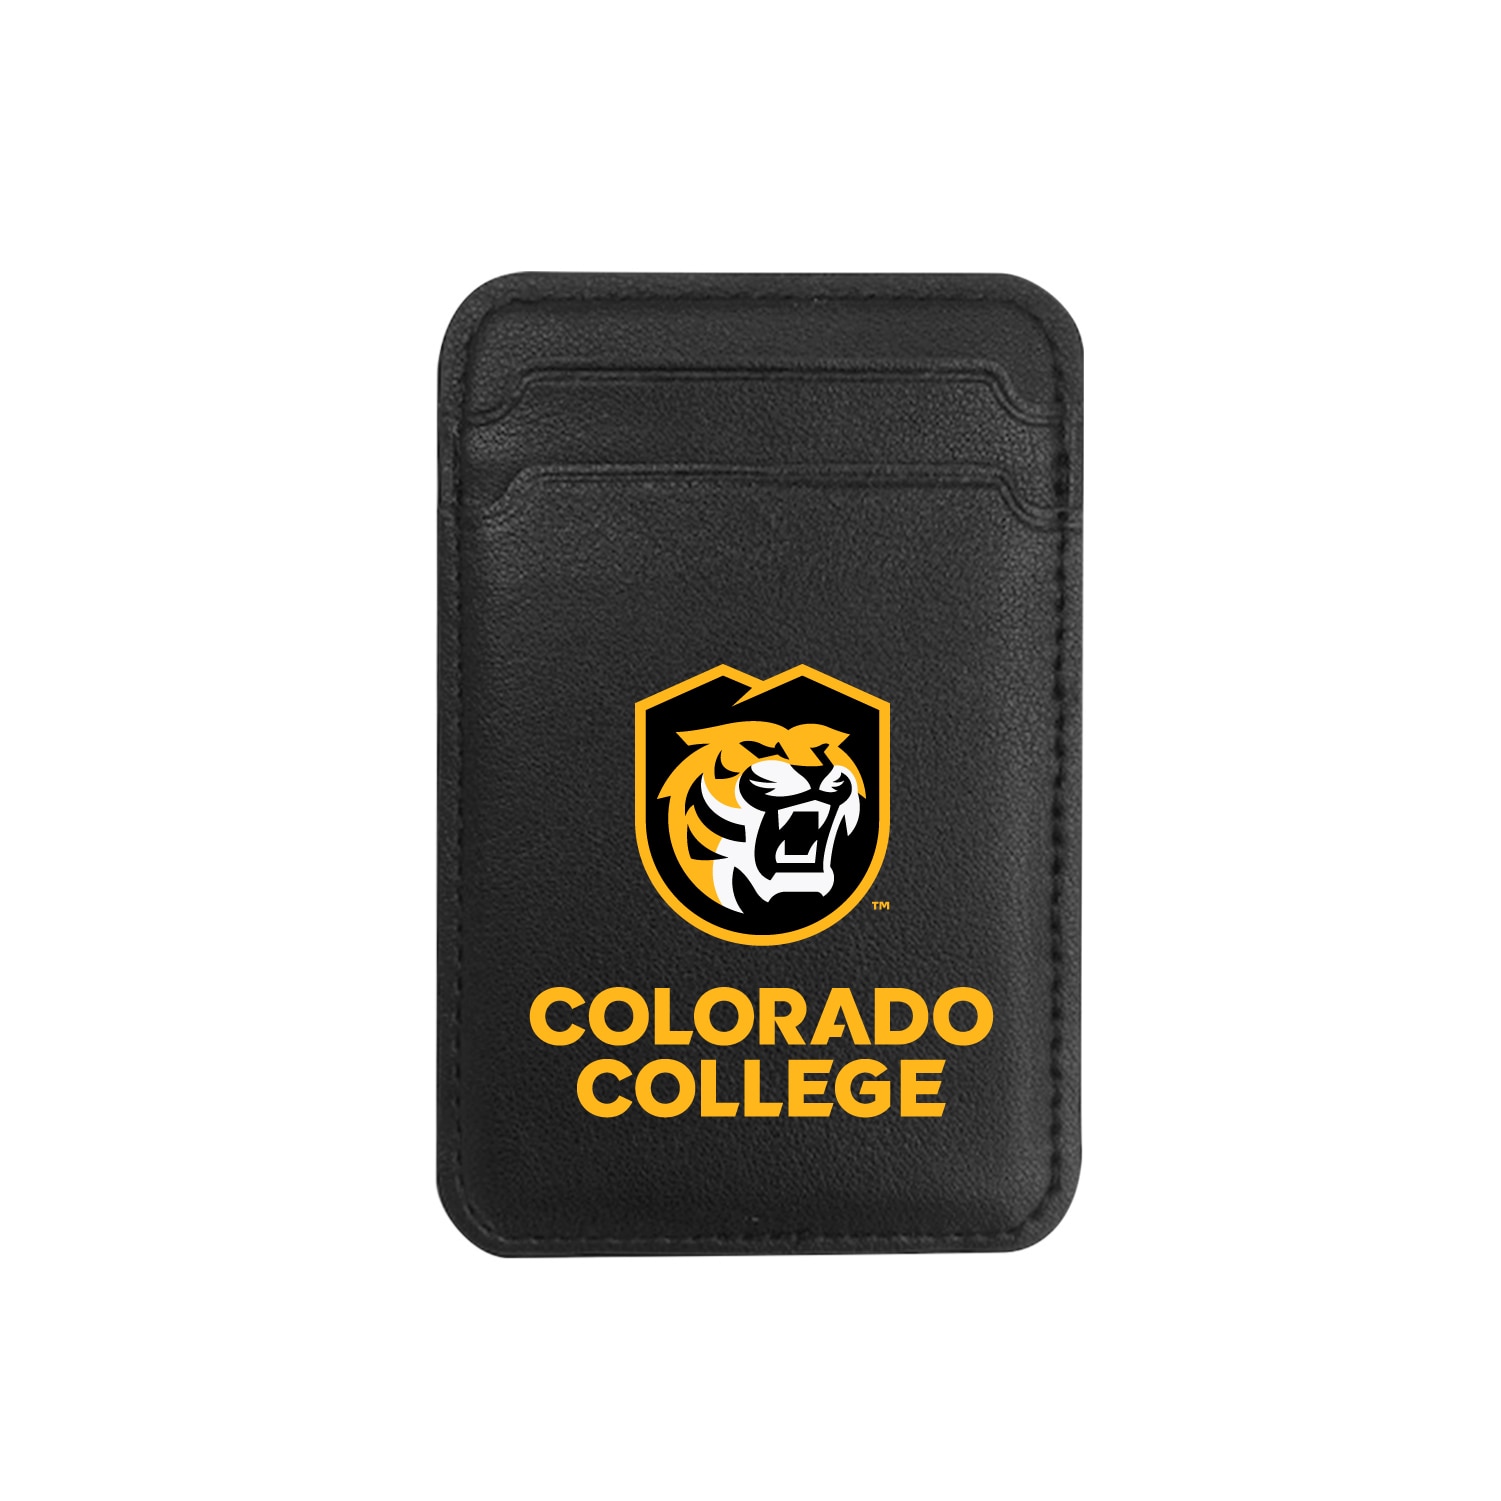 Colorado College - Leather Wallet Sleeve (Top Load, Mag Safe), Black, Classic V1